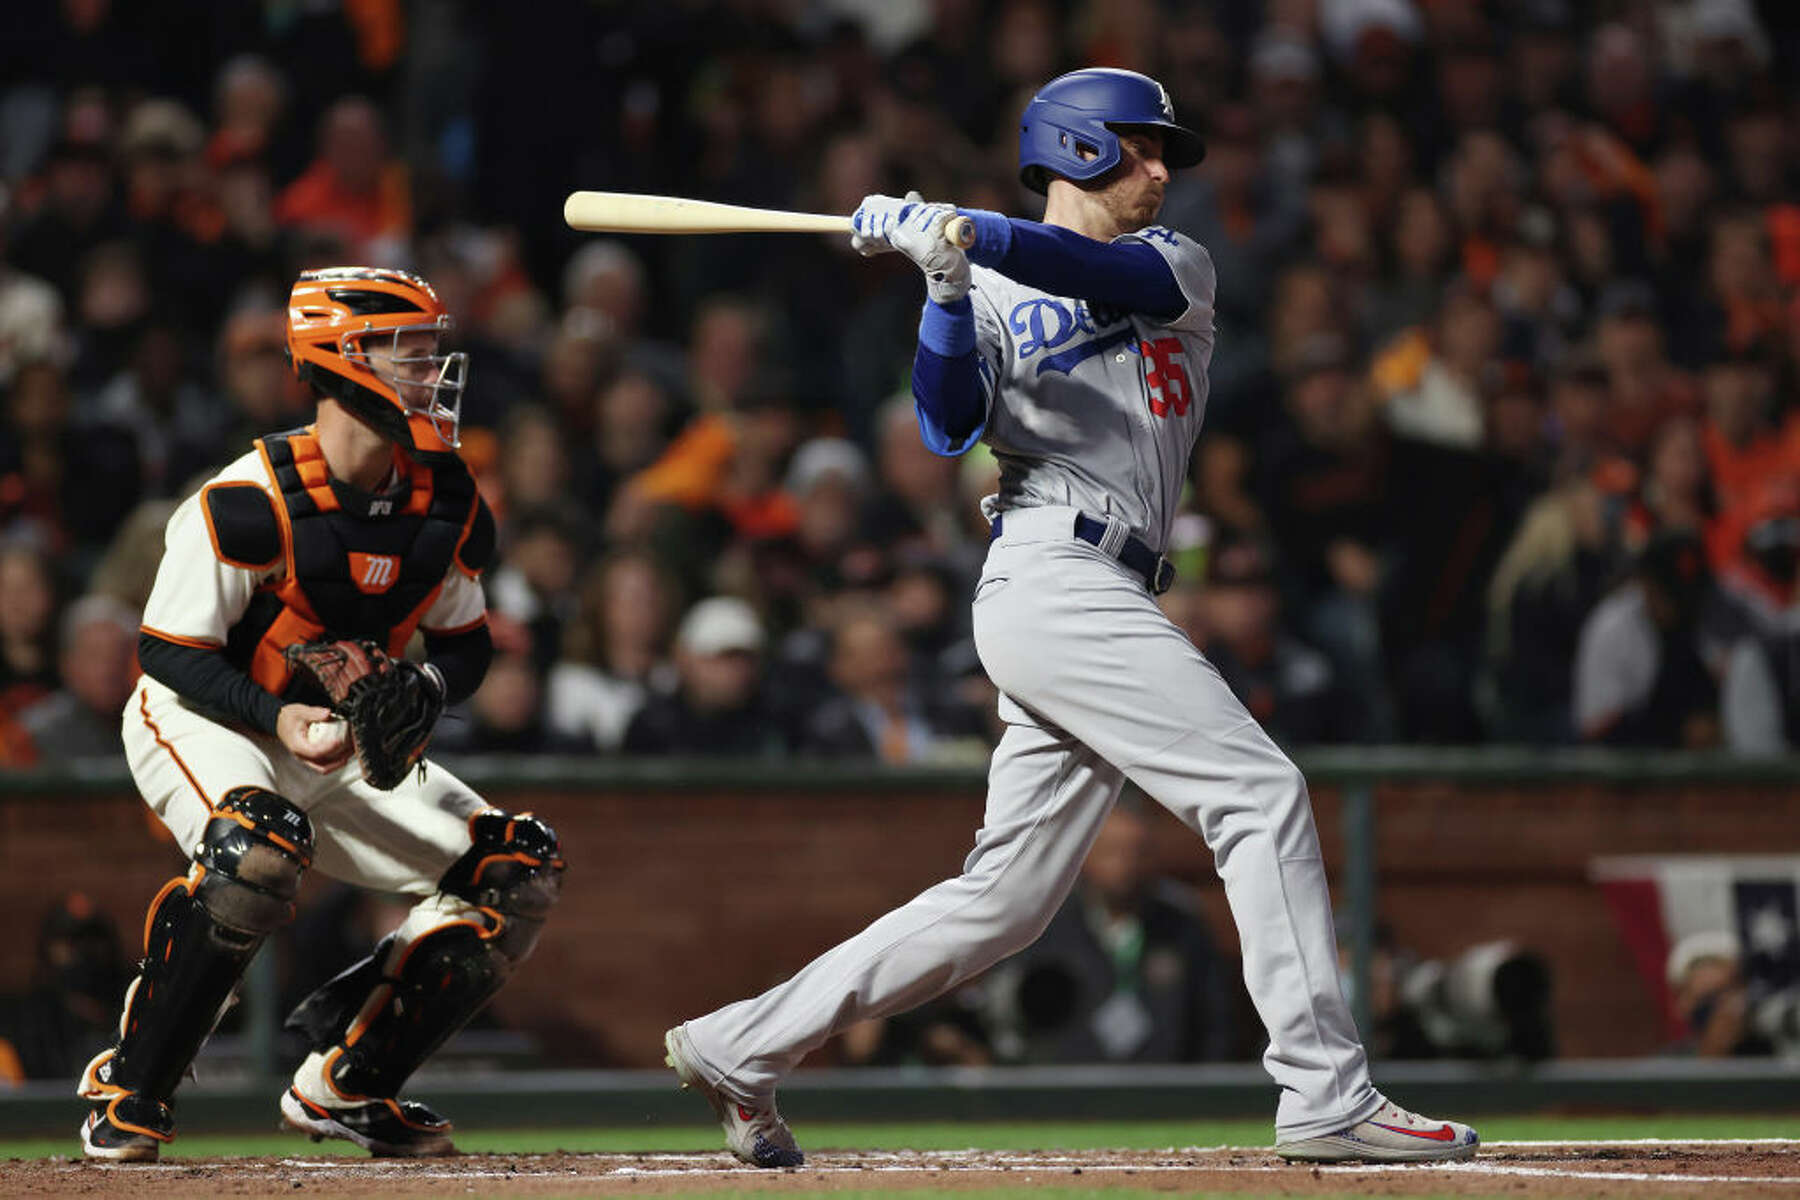 Are Dodgers Fans Right To Be Cranky About Game 1 Calls Vs Giants